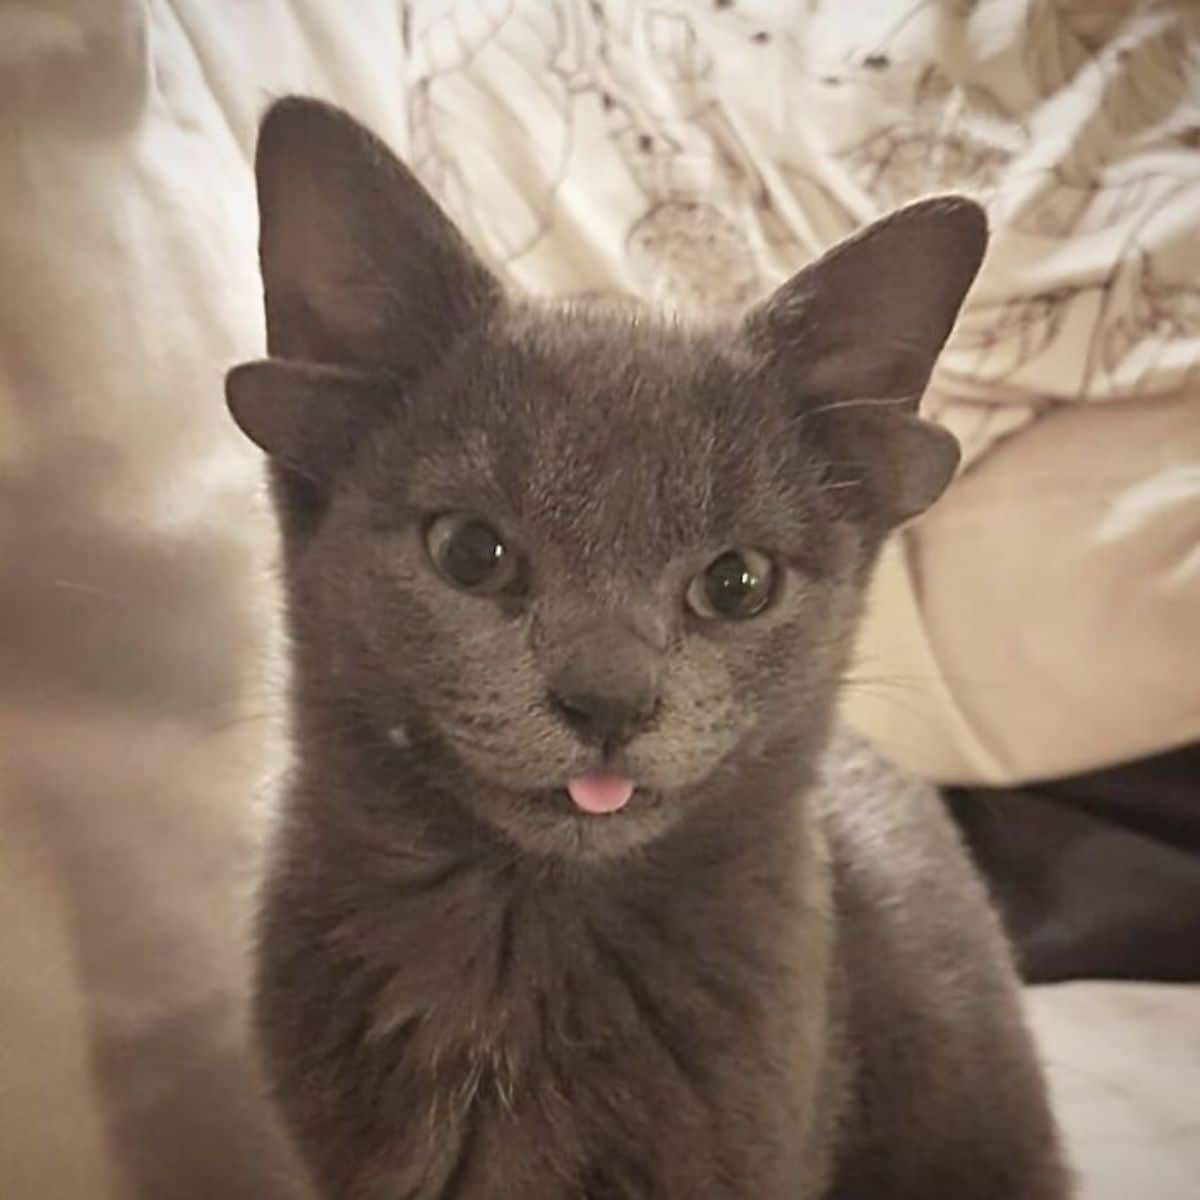 grey kitten with four ears sitting with the tongue sticking out slightly